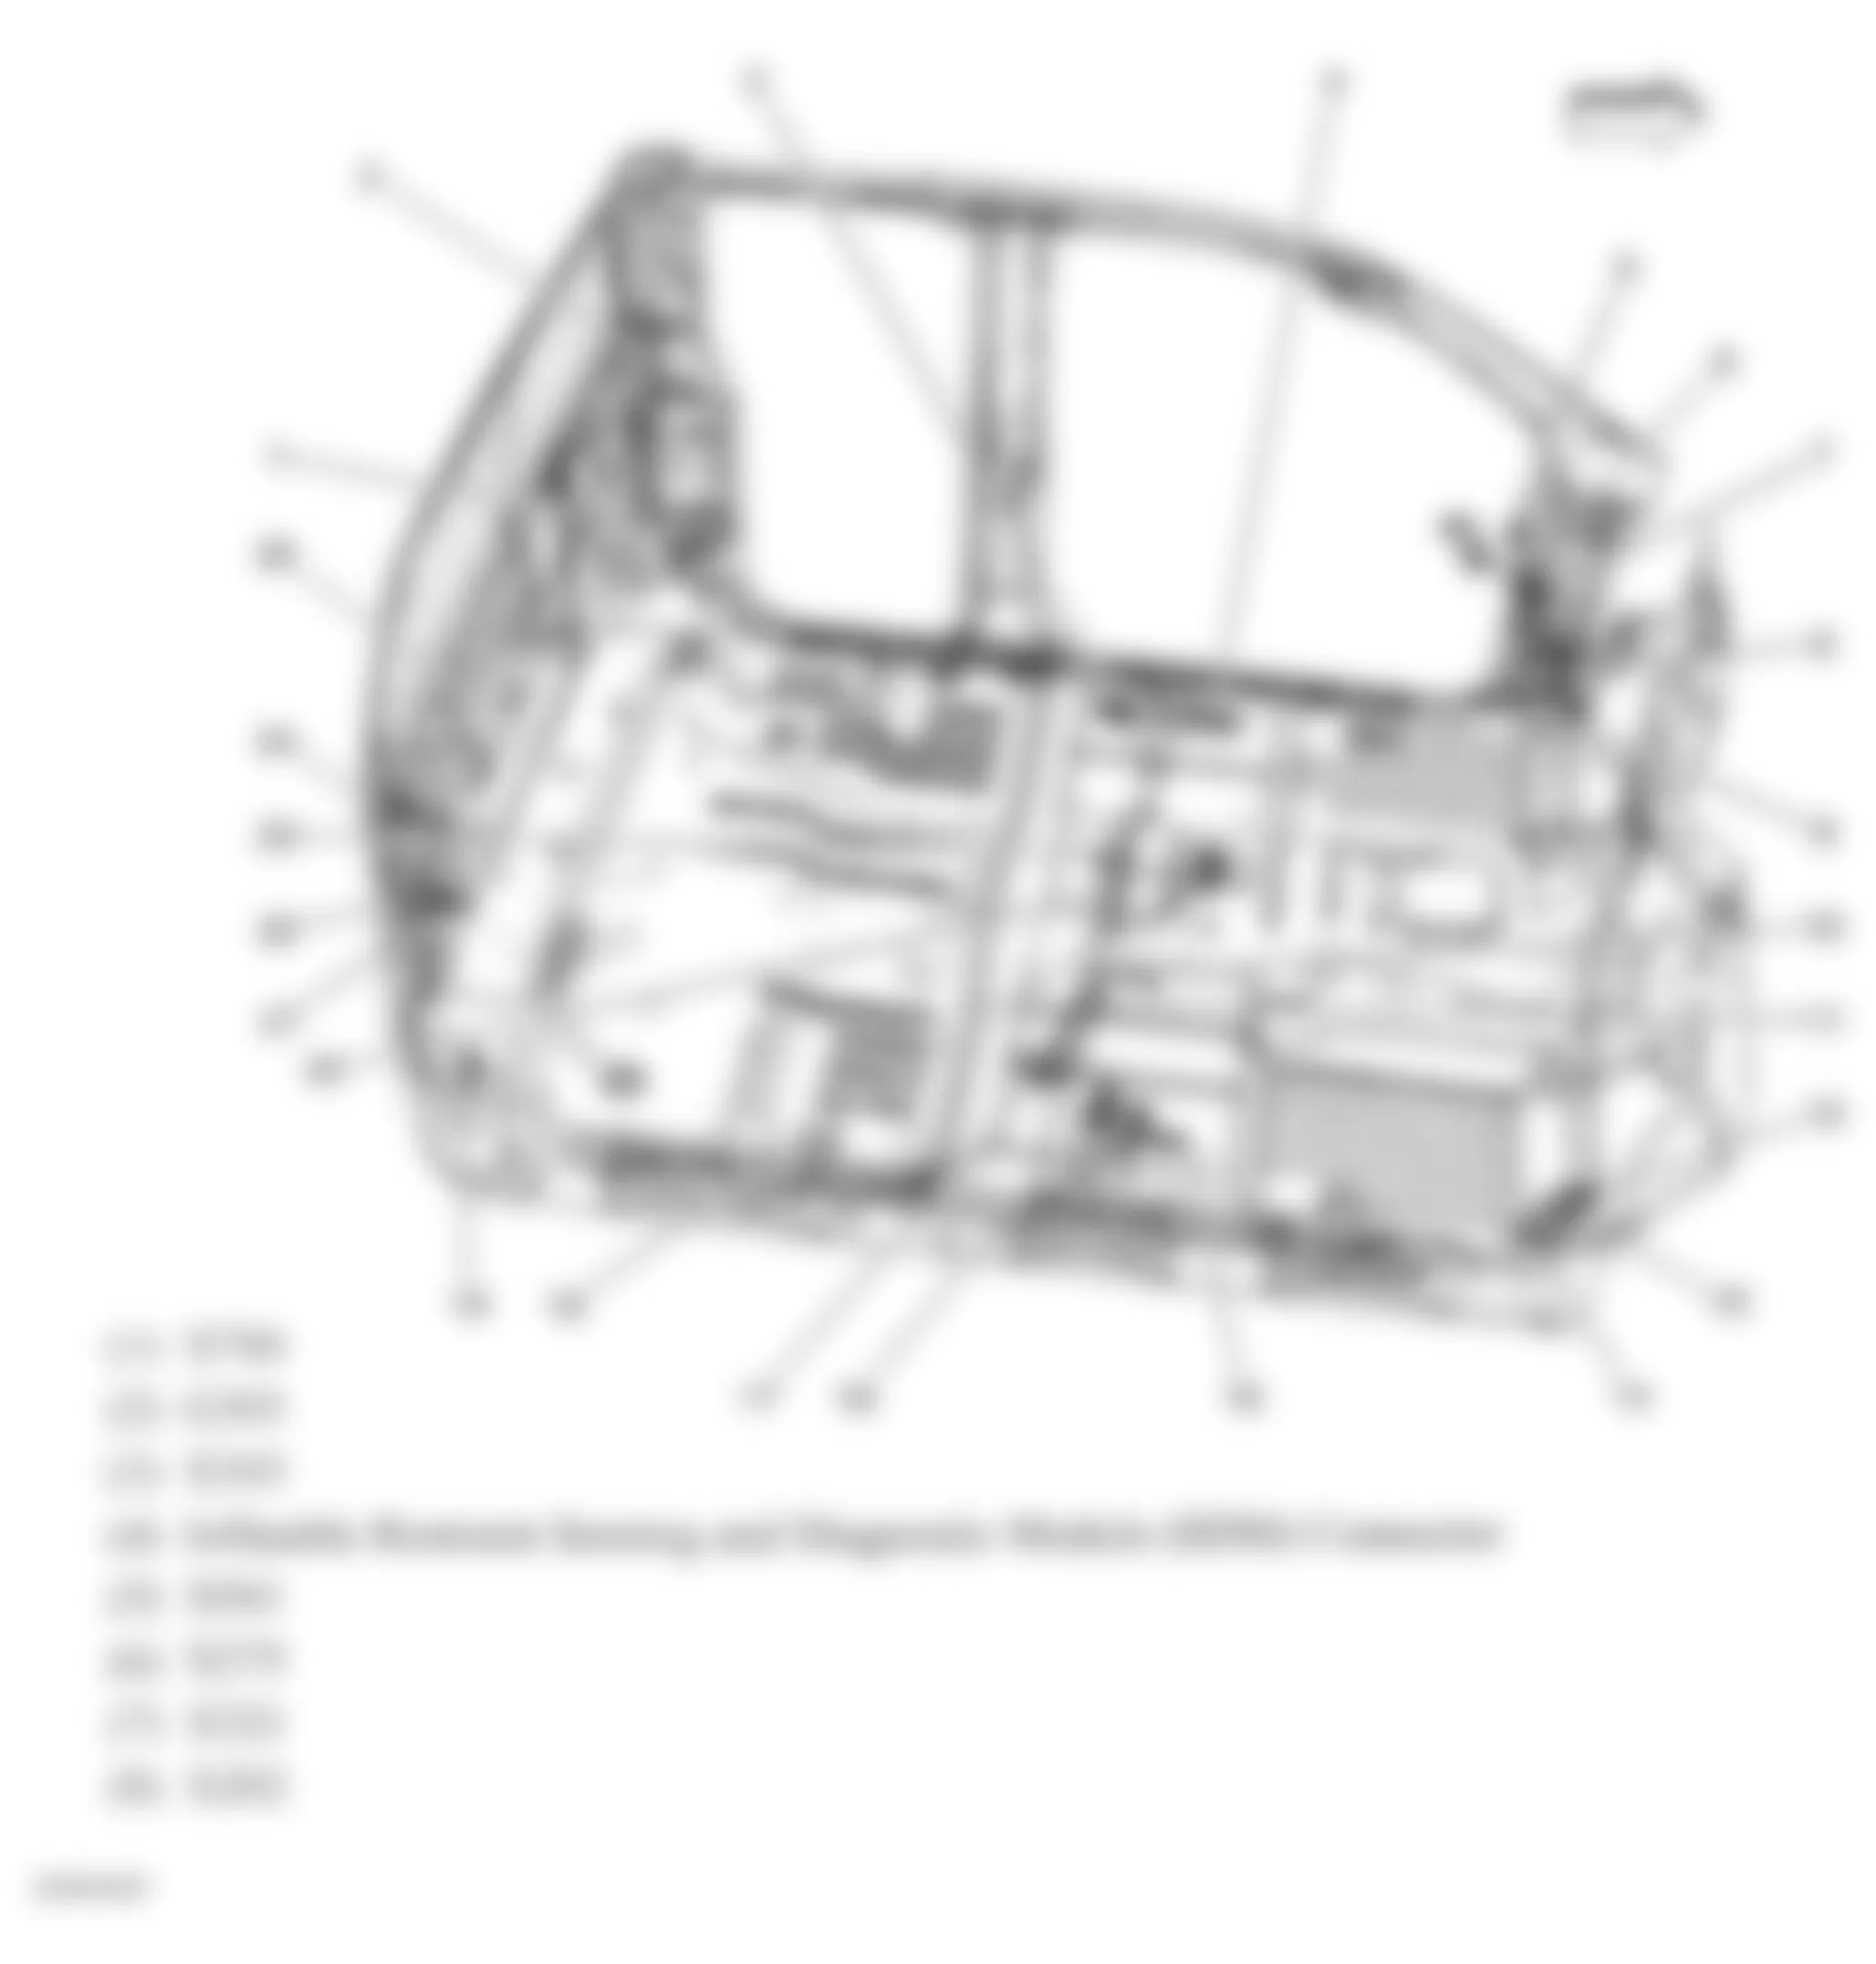 GMC Sierra 1500 2009 - Component Locations -  Passenger Compartment (Extended Cab) (1 Of 2)